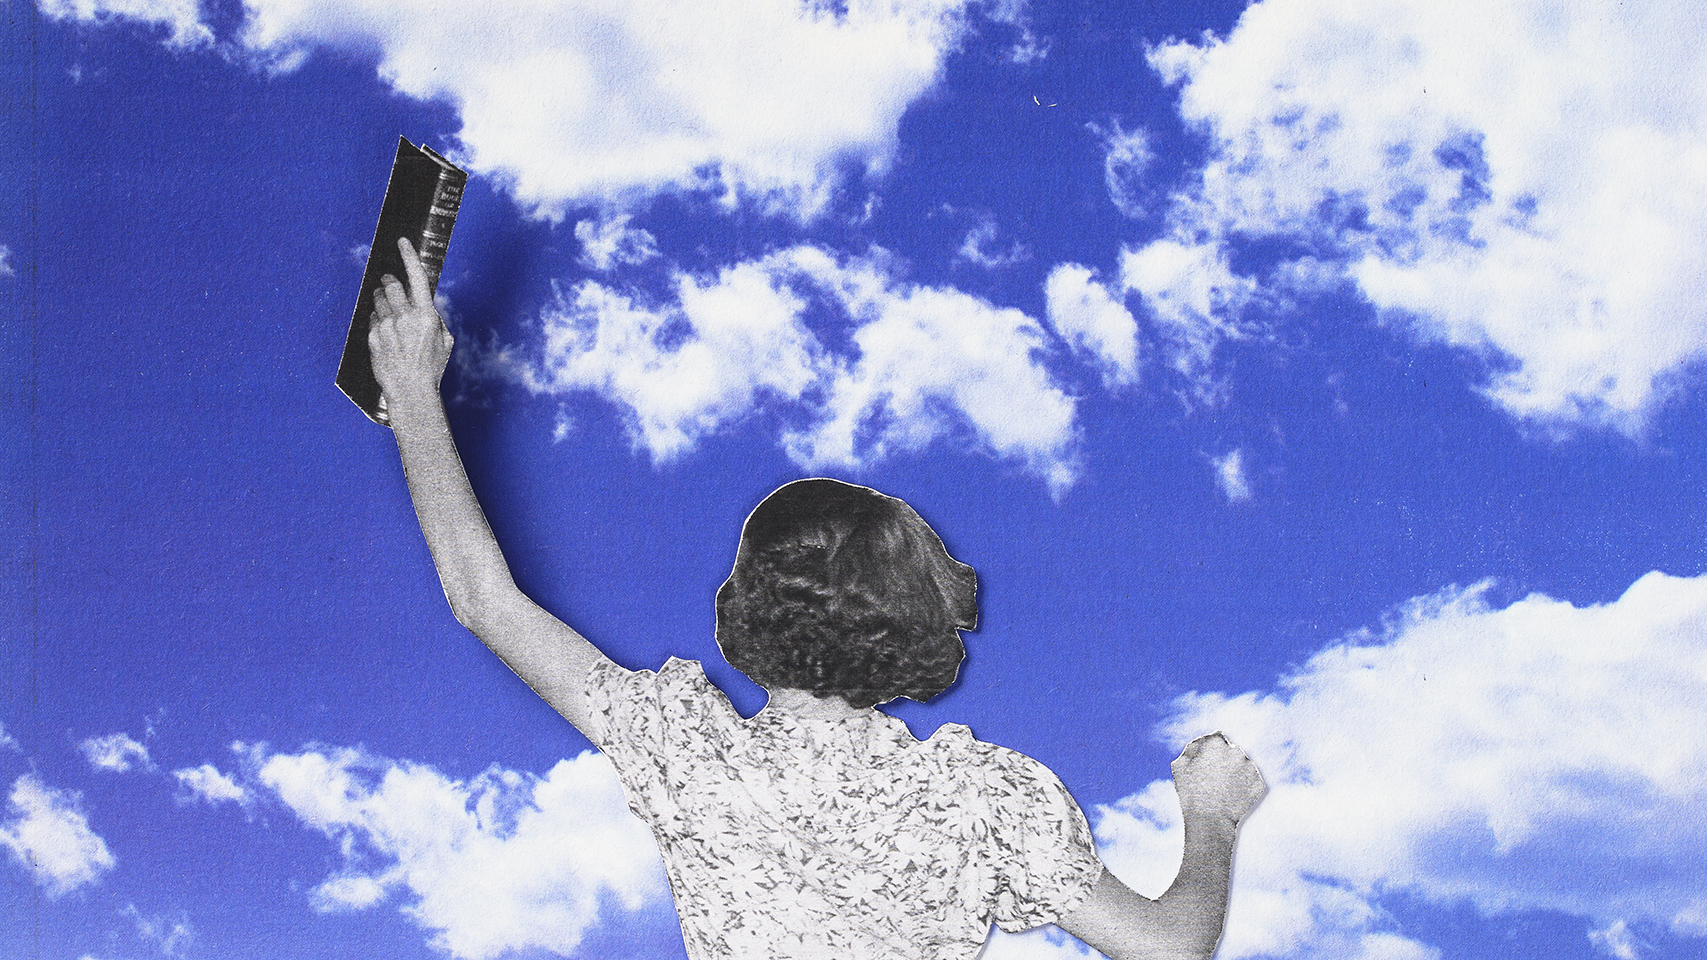 A figure holding a book, reaching up into a cloudy sky